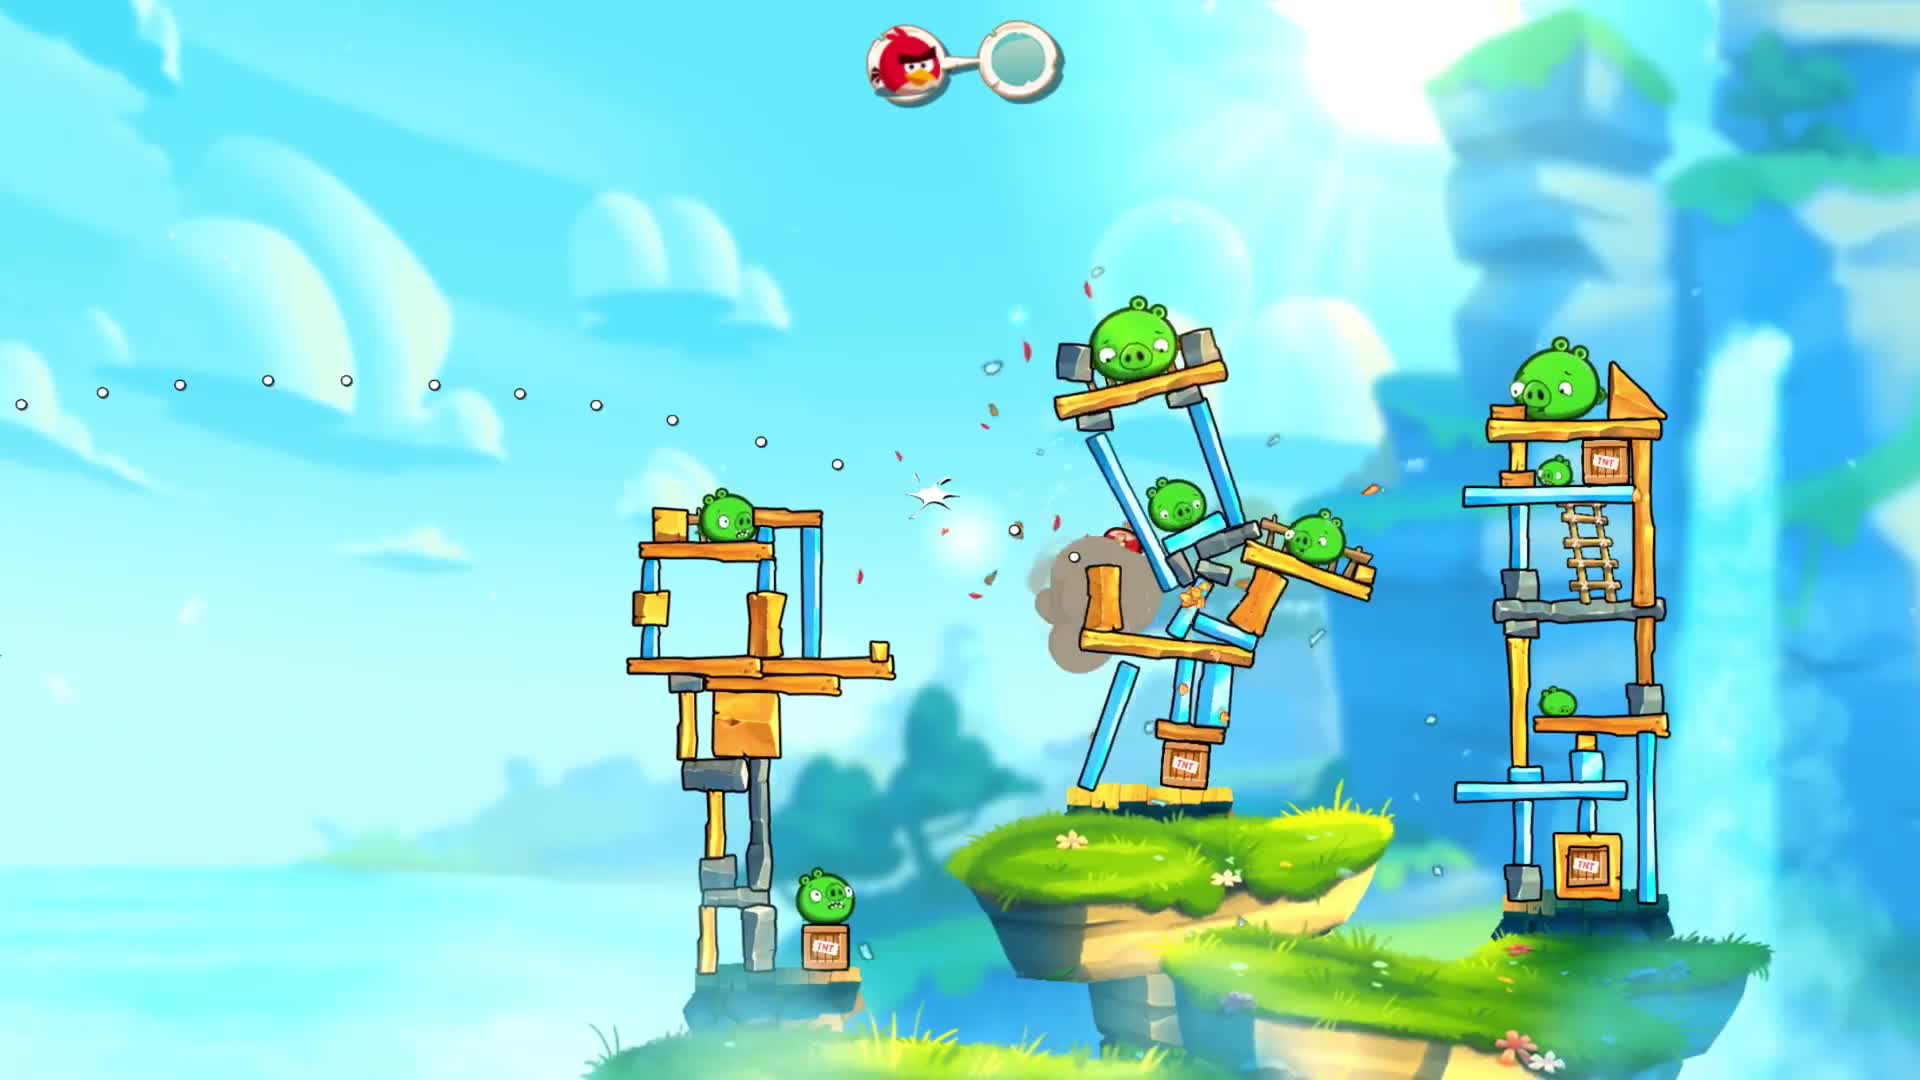 Angry Birds 2 - gameplay teaser